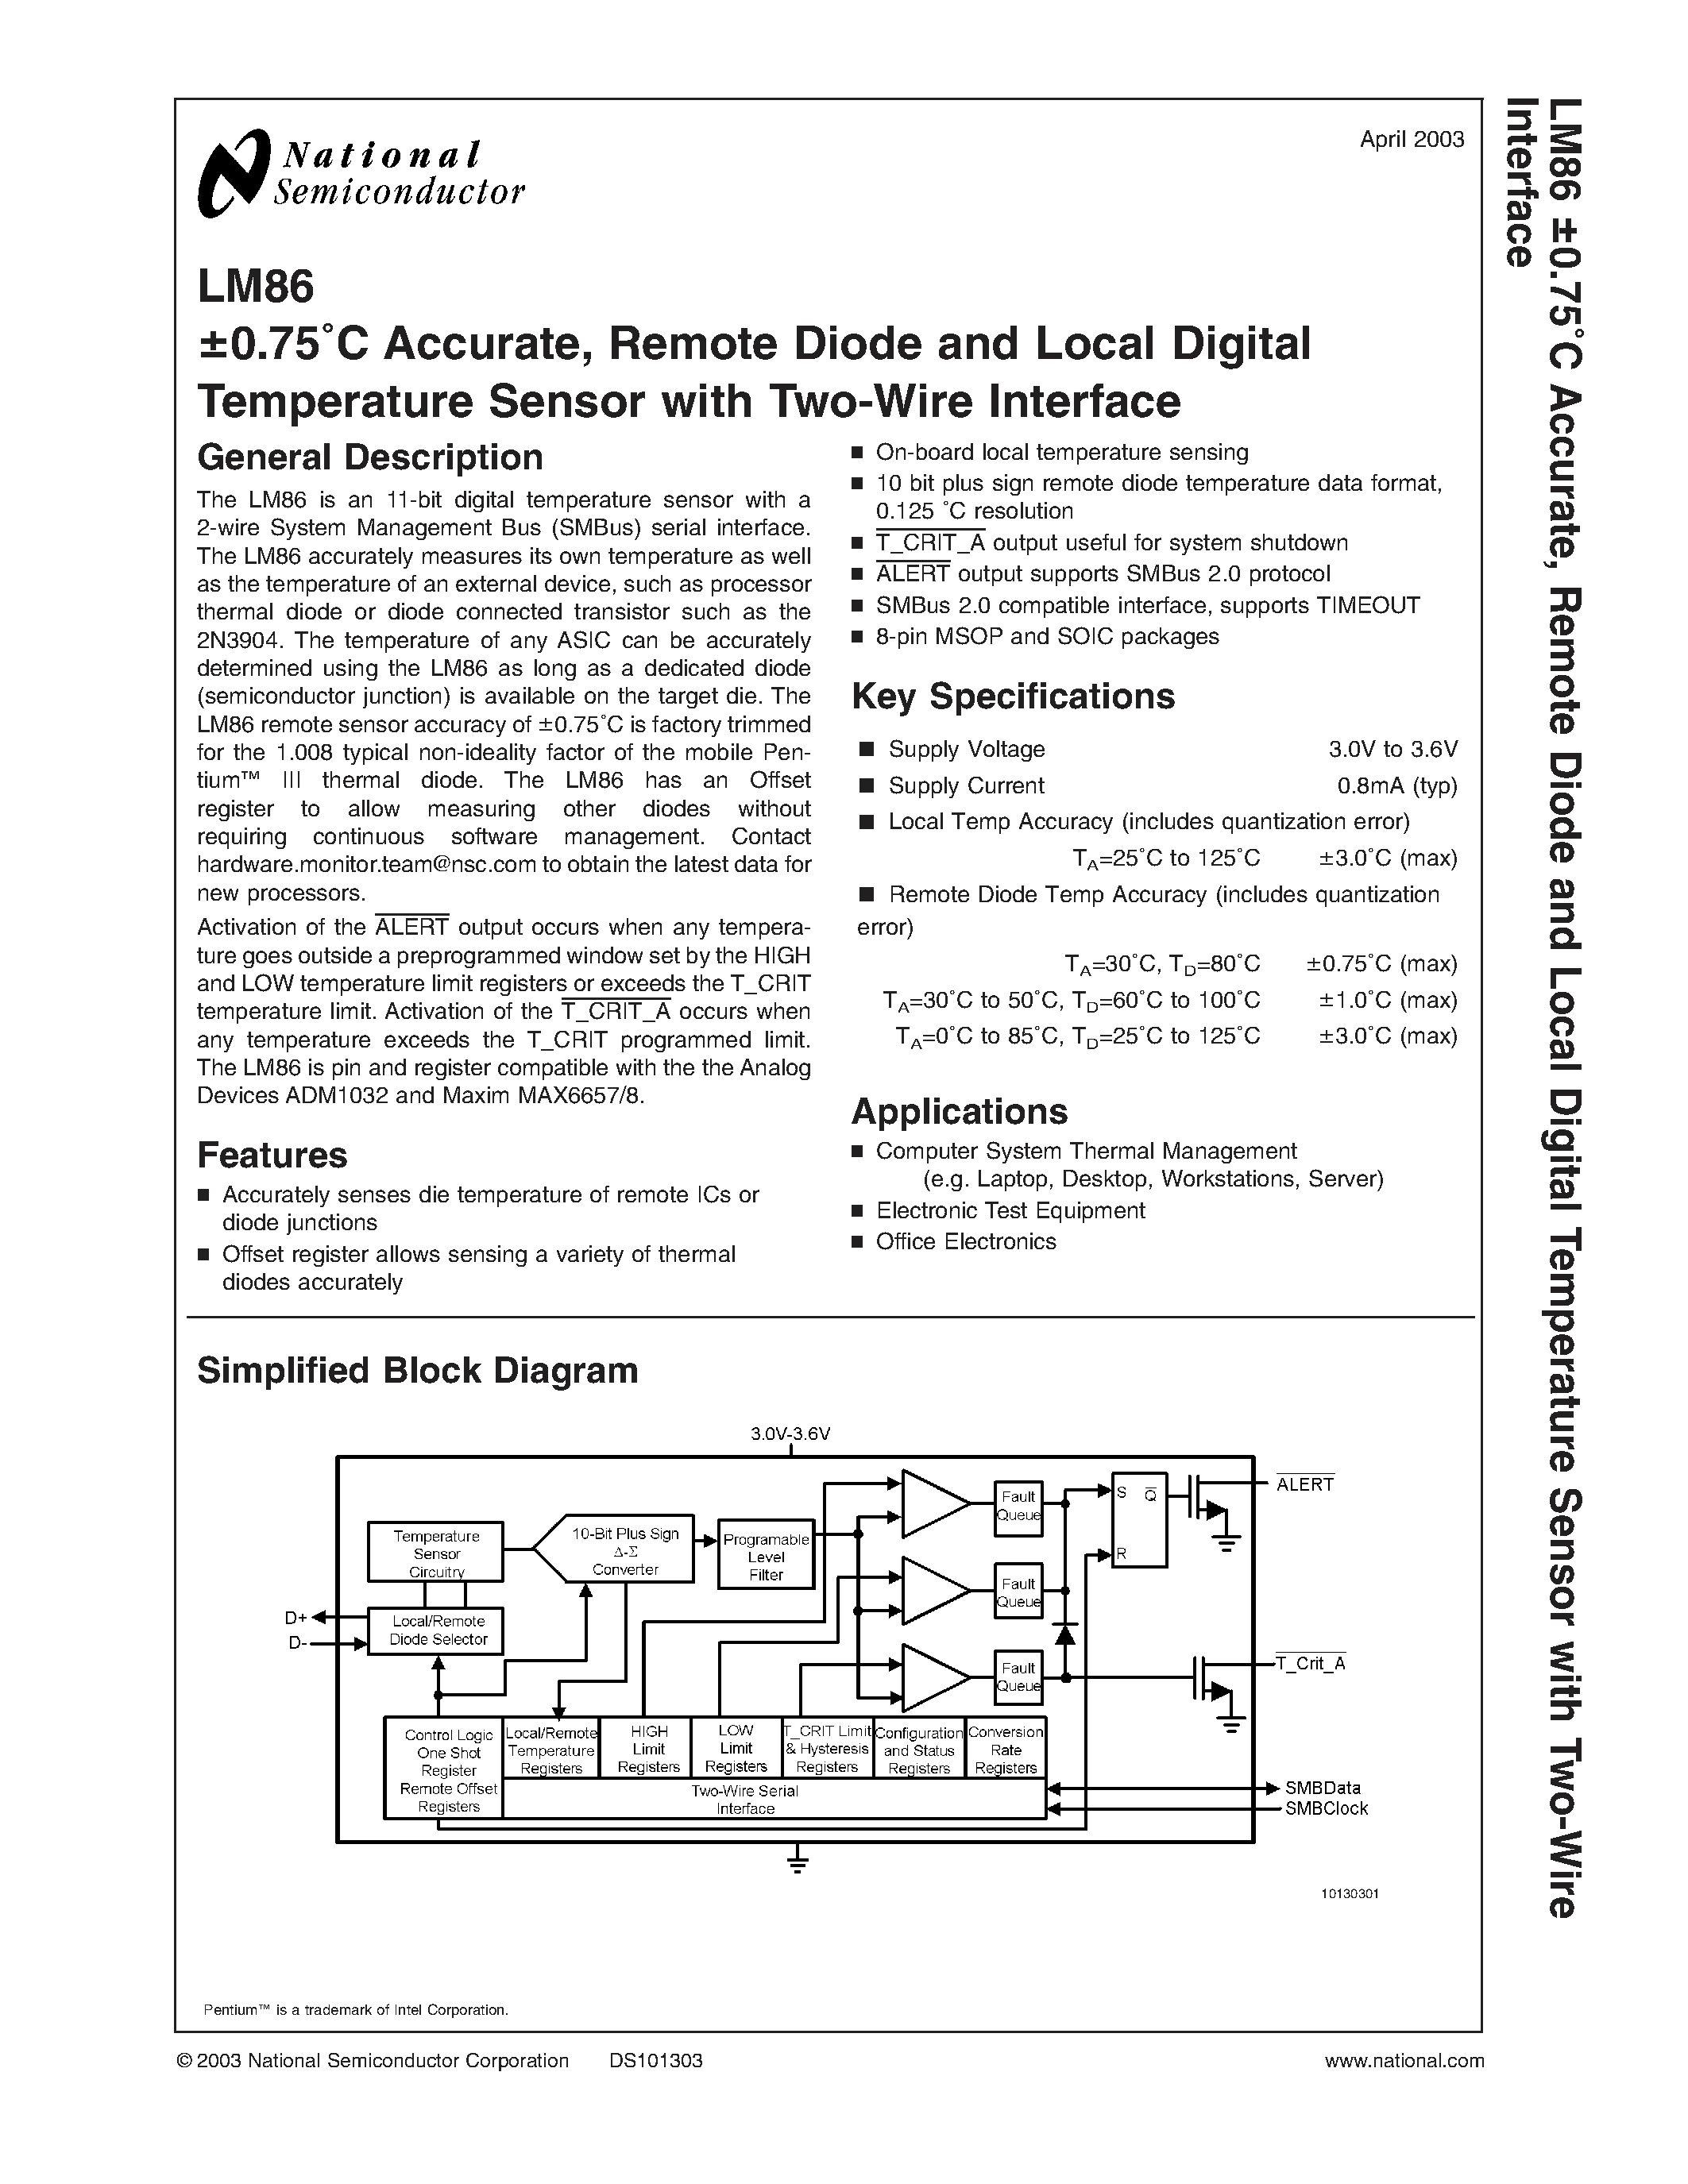 Datasheet LM86CIMX - 0.75C Accurate / Remote Diode and Local Digital Temperature Sensor with Two-Wire Interface page 1